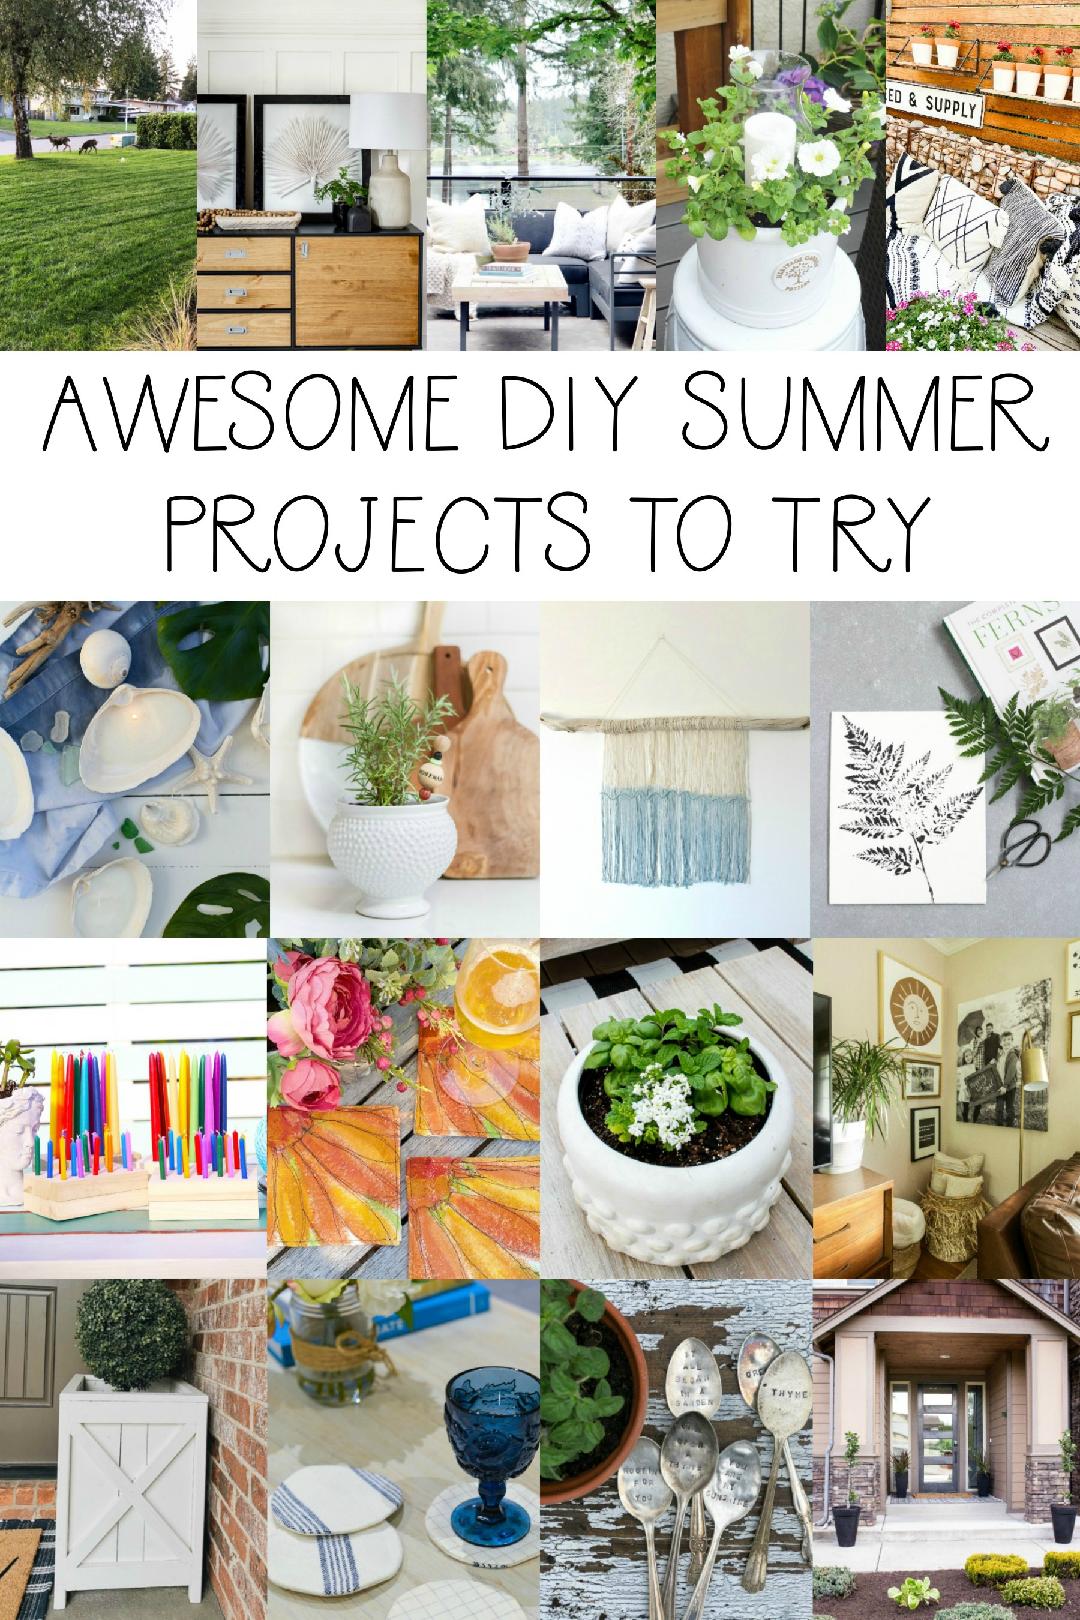 Awesome DIY Summer projects to try. Lots of outdoor summer projects to make your home more beautiful.